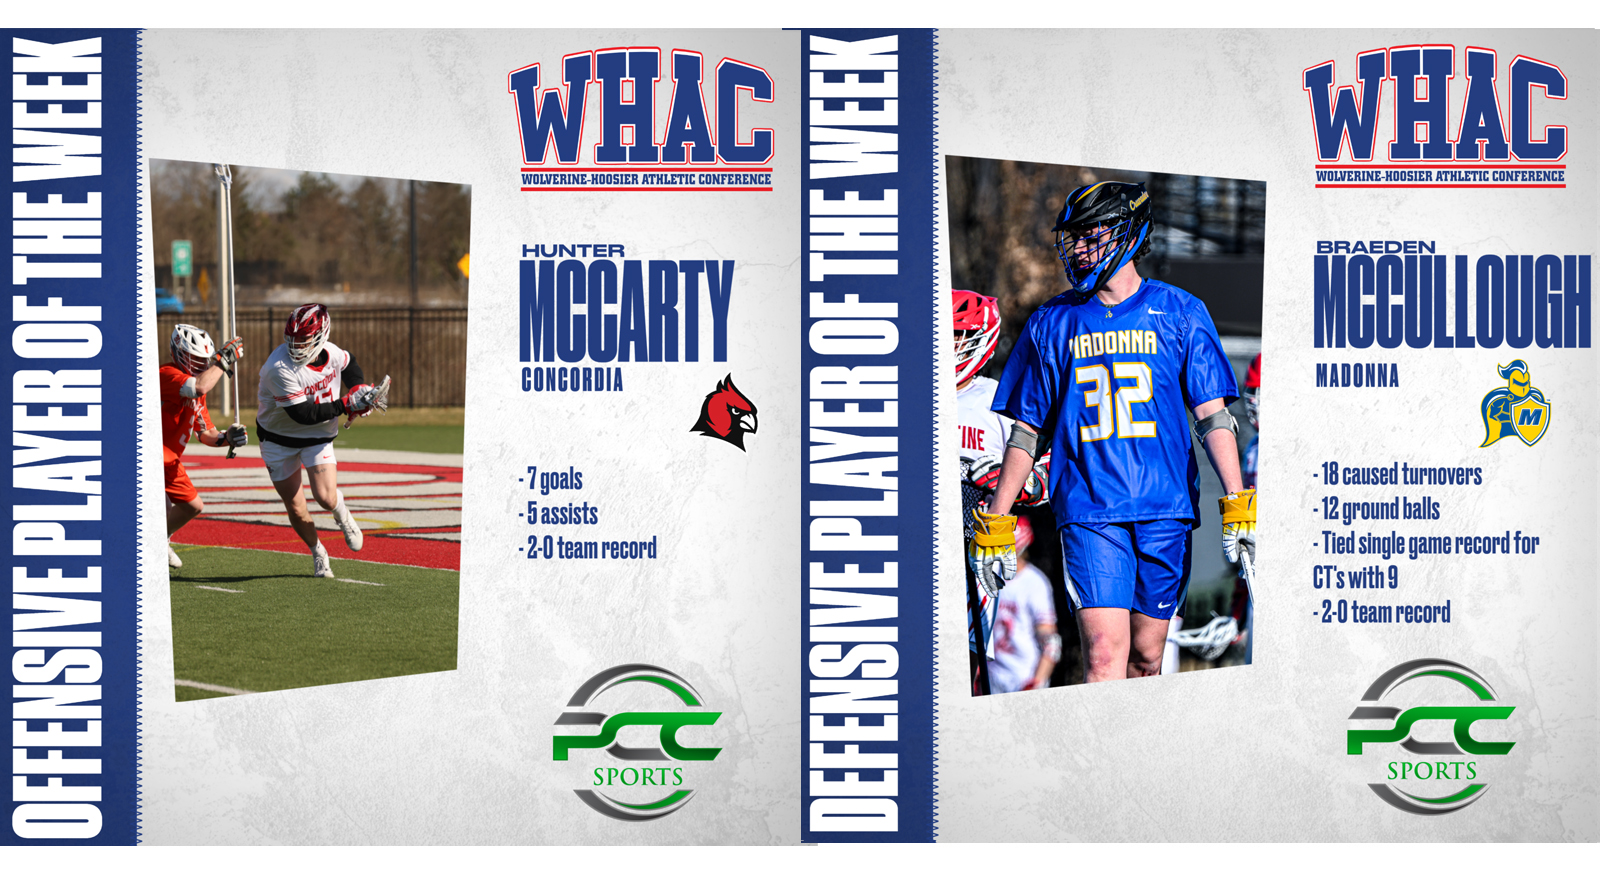 McCullough and McCarty earn Player of the Week